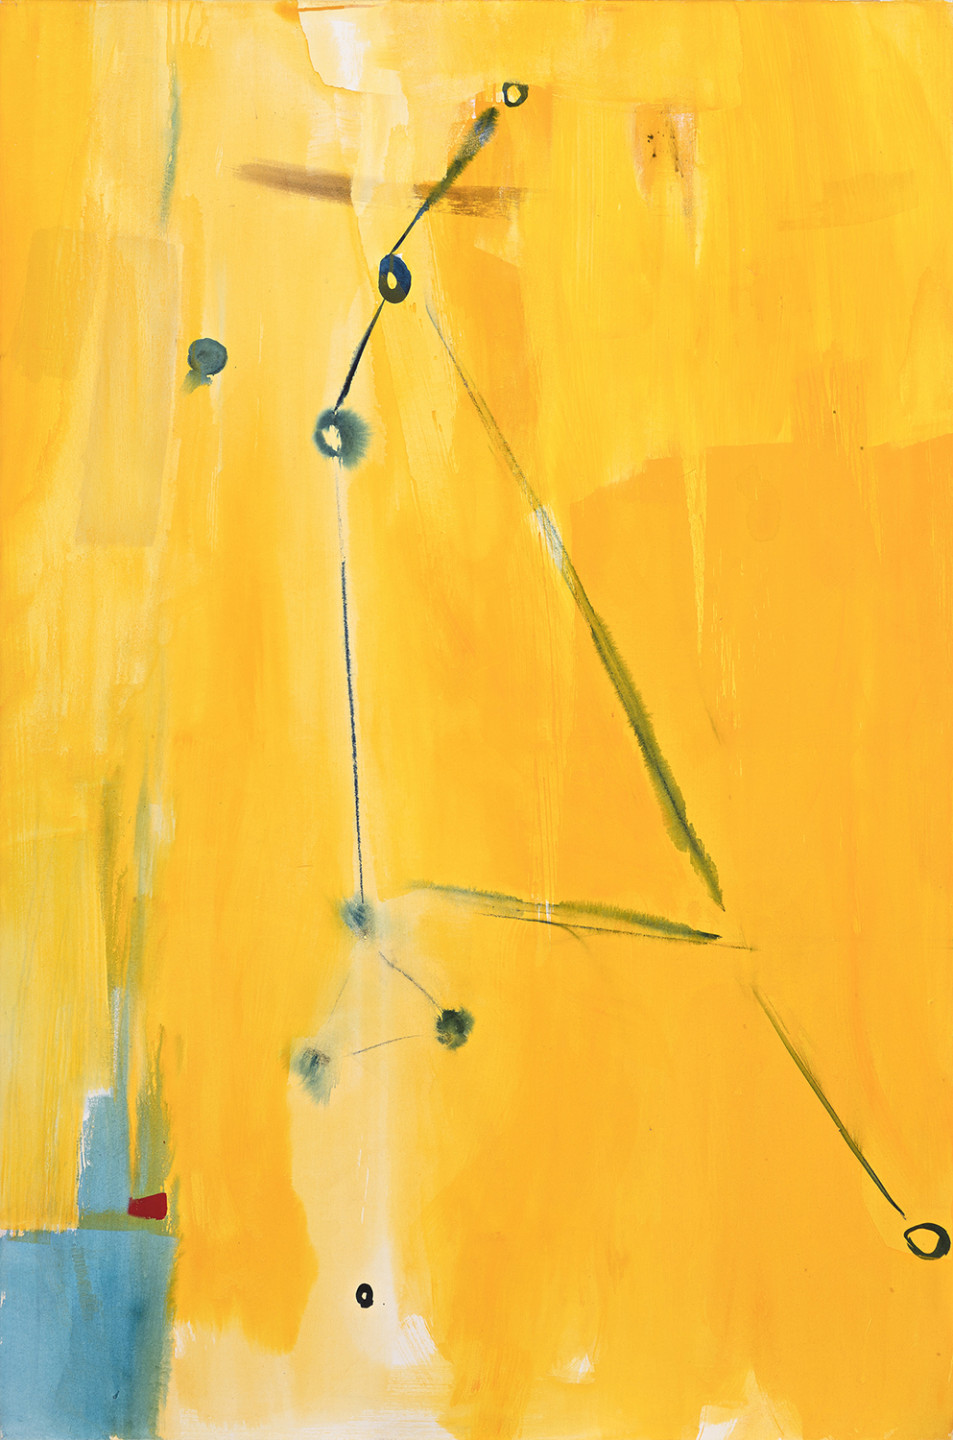 Painting in yellow with blue forms